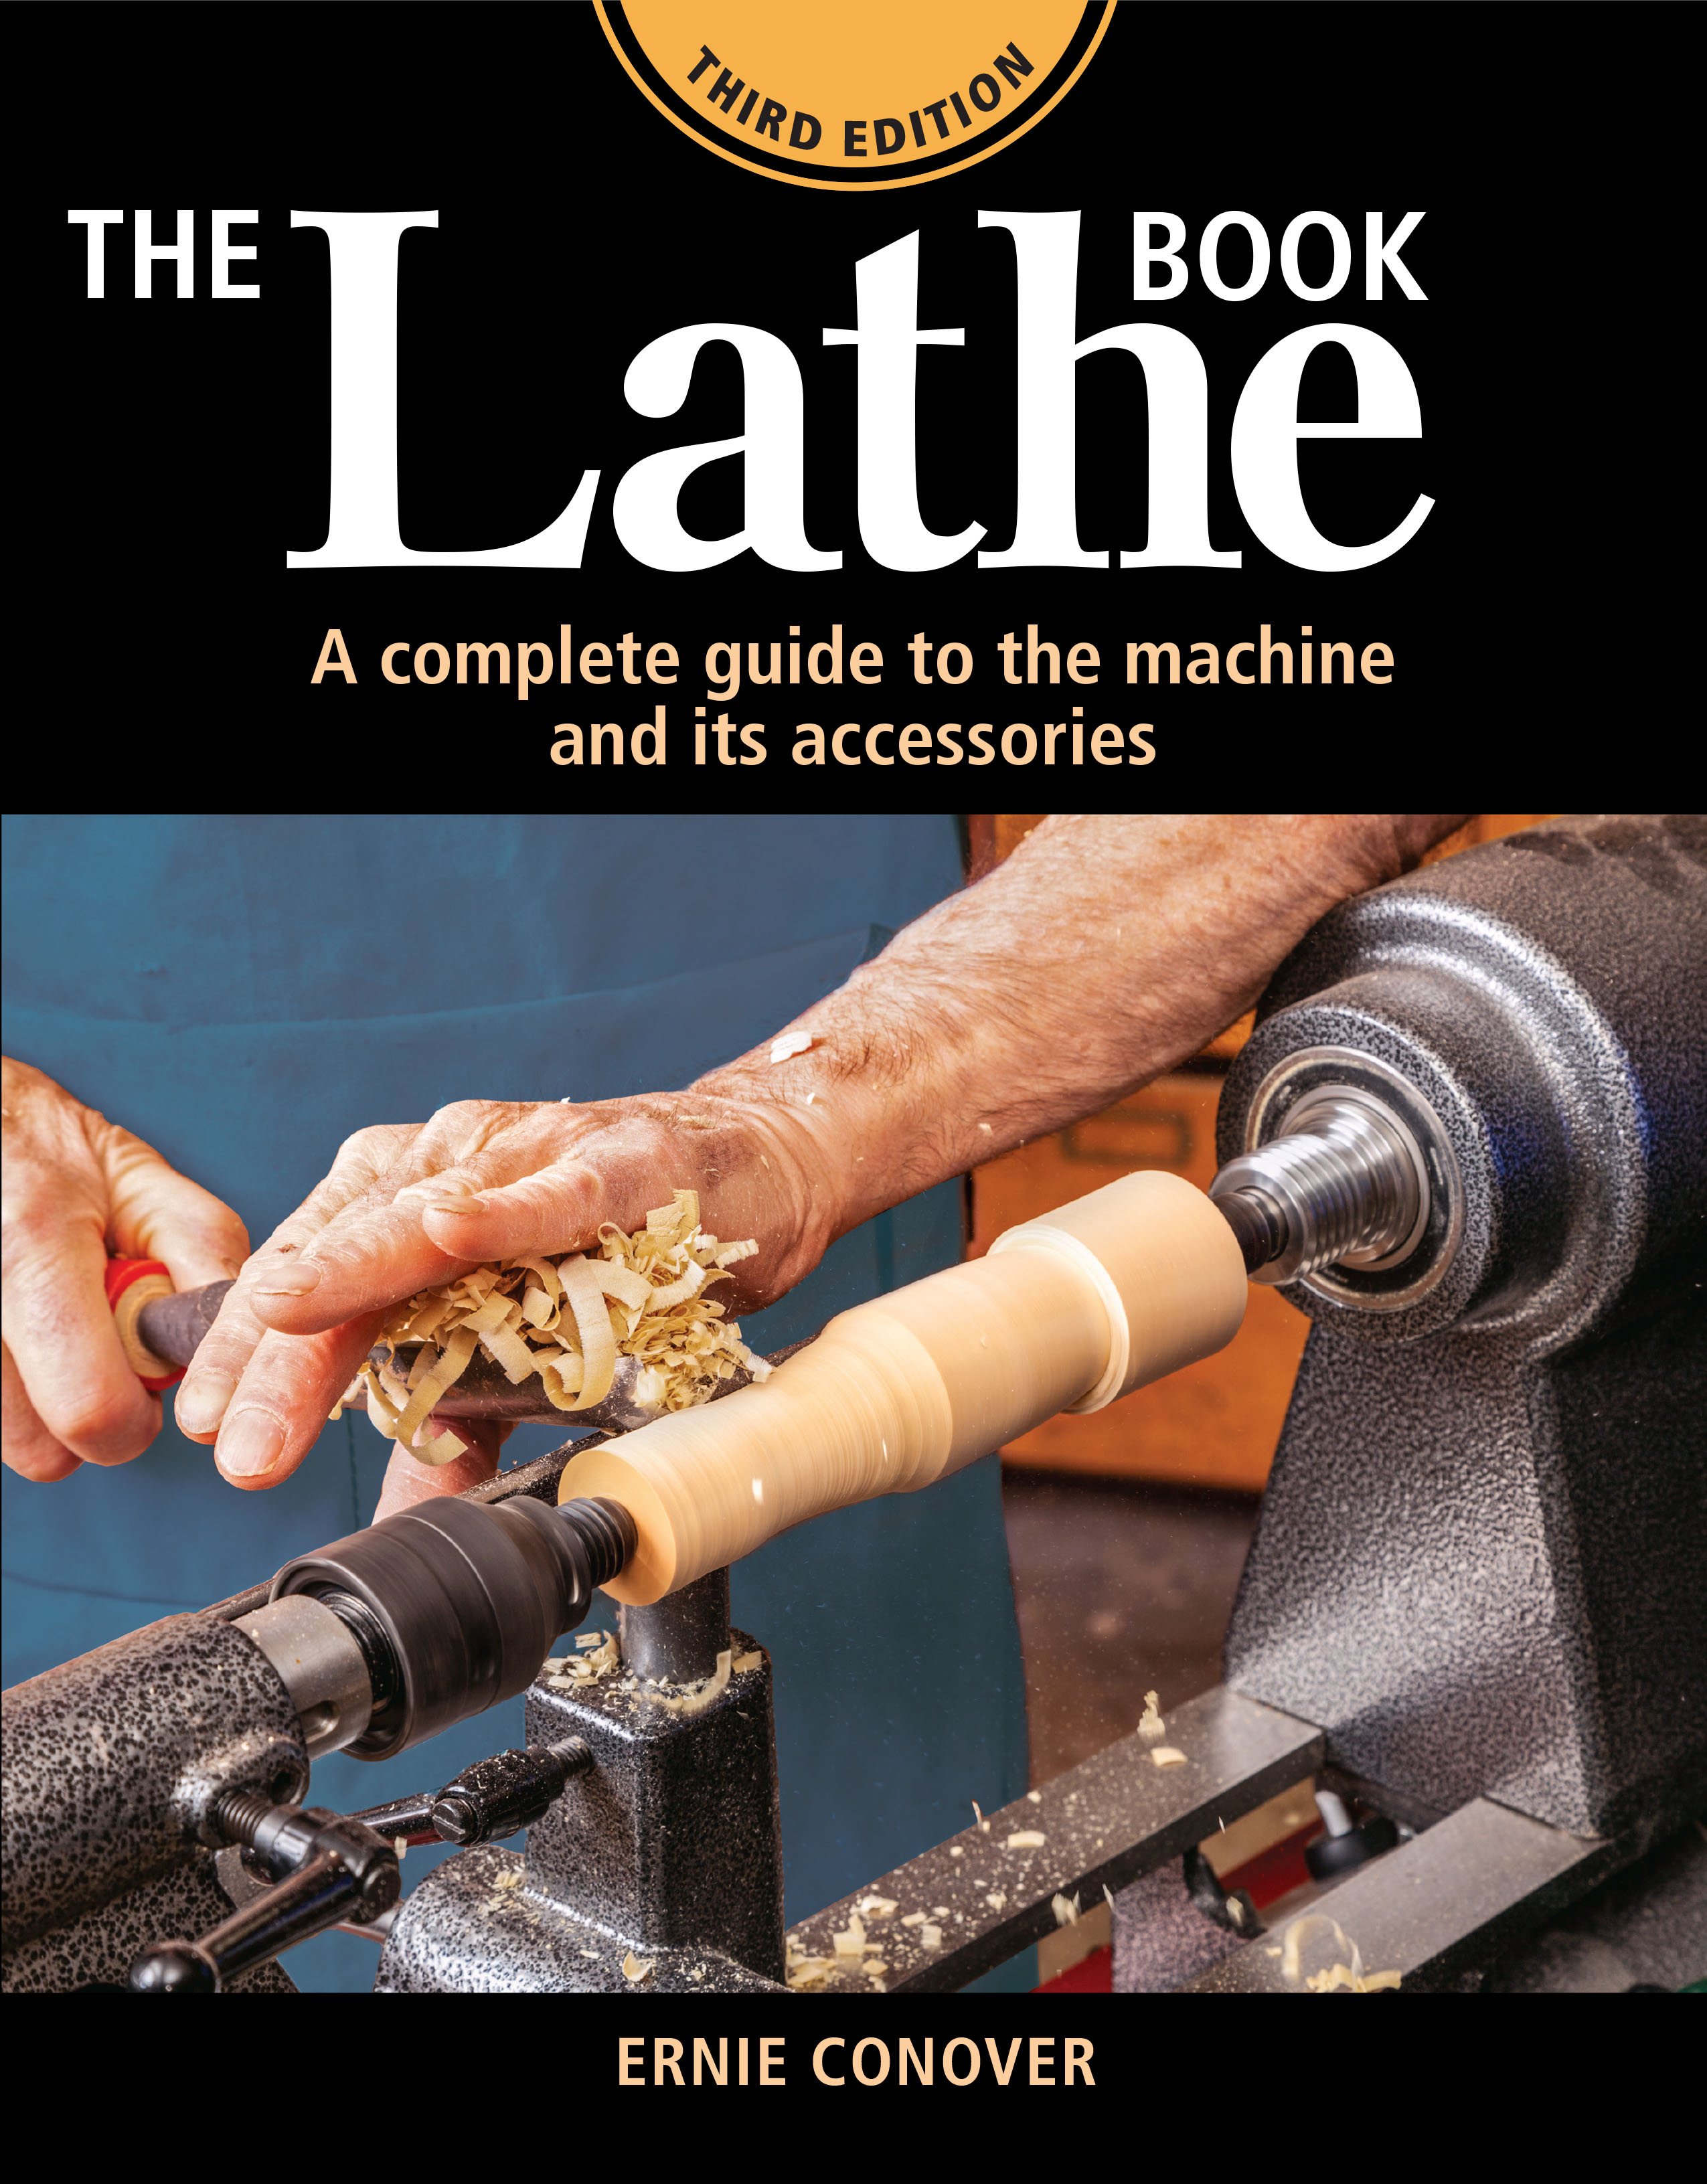 The Lathe Book by Ernie Conover